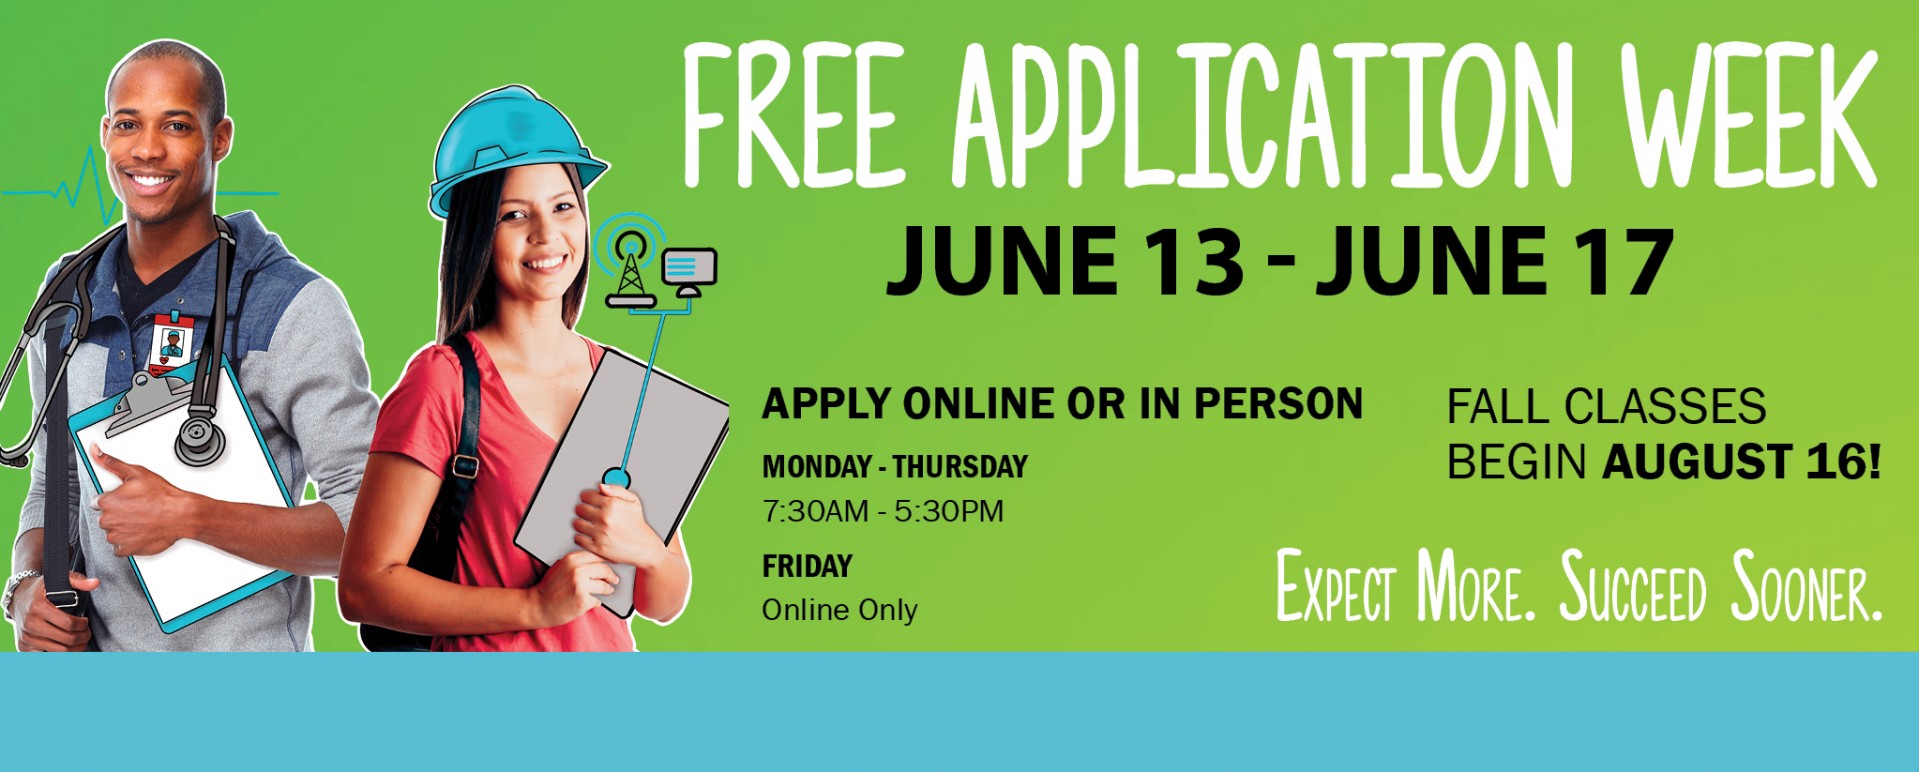 Apply online or in-person during Free App Week and we will WAIVE your application fee!